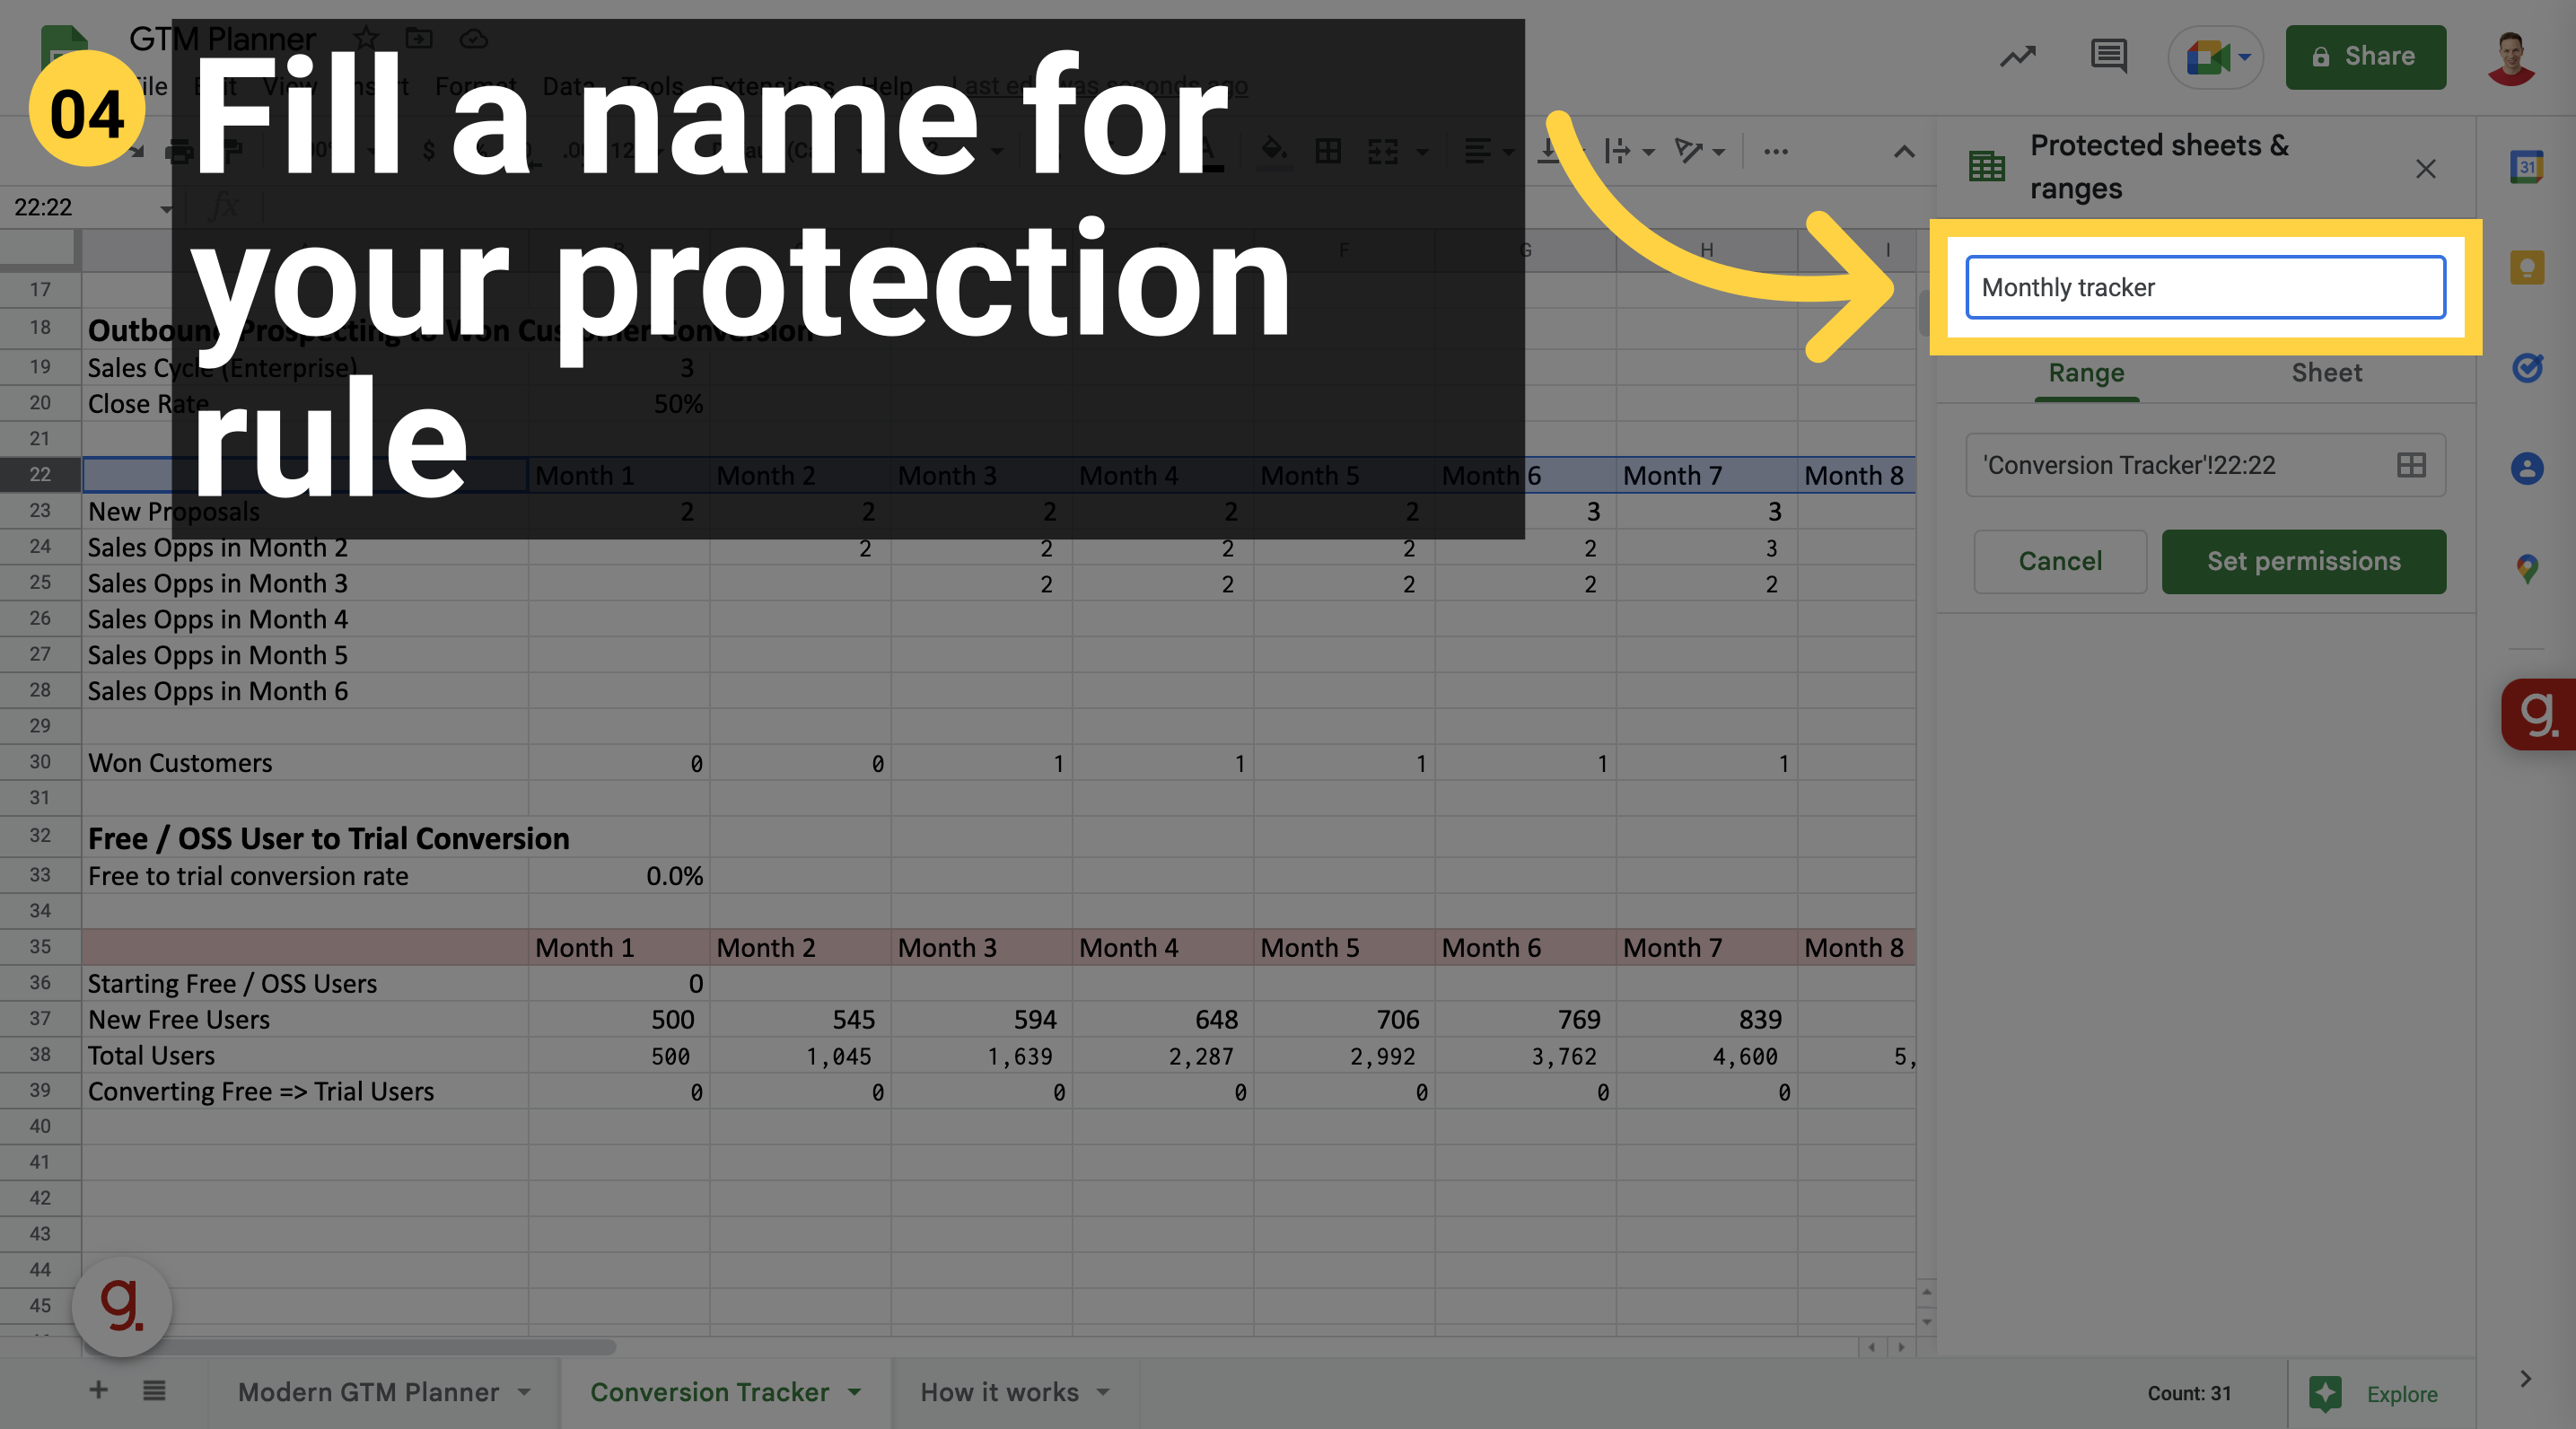 Fill a name for your protection rule